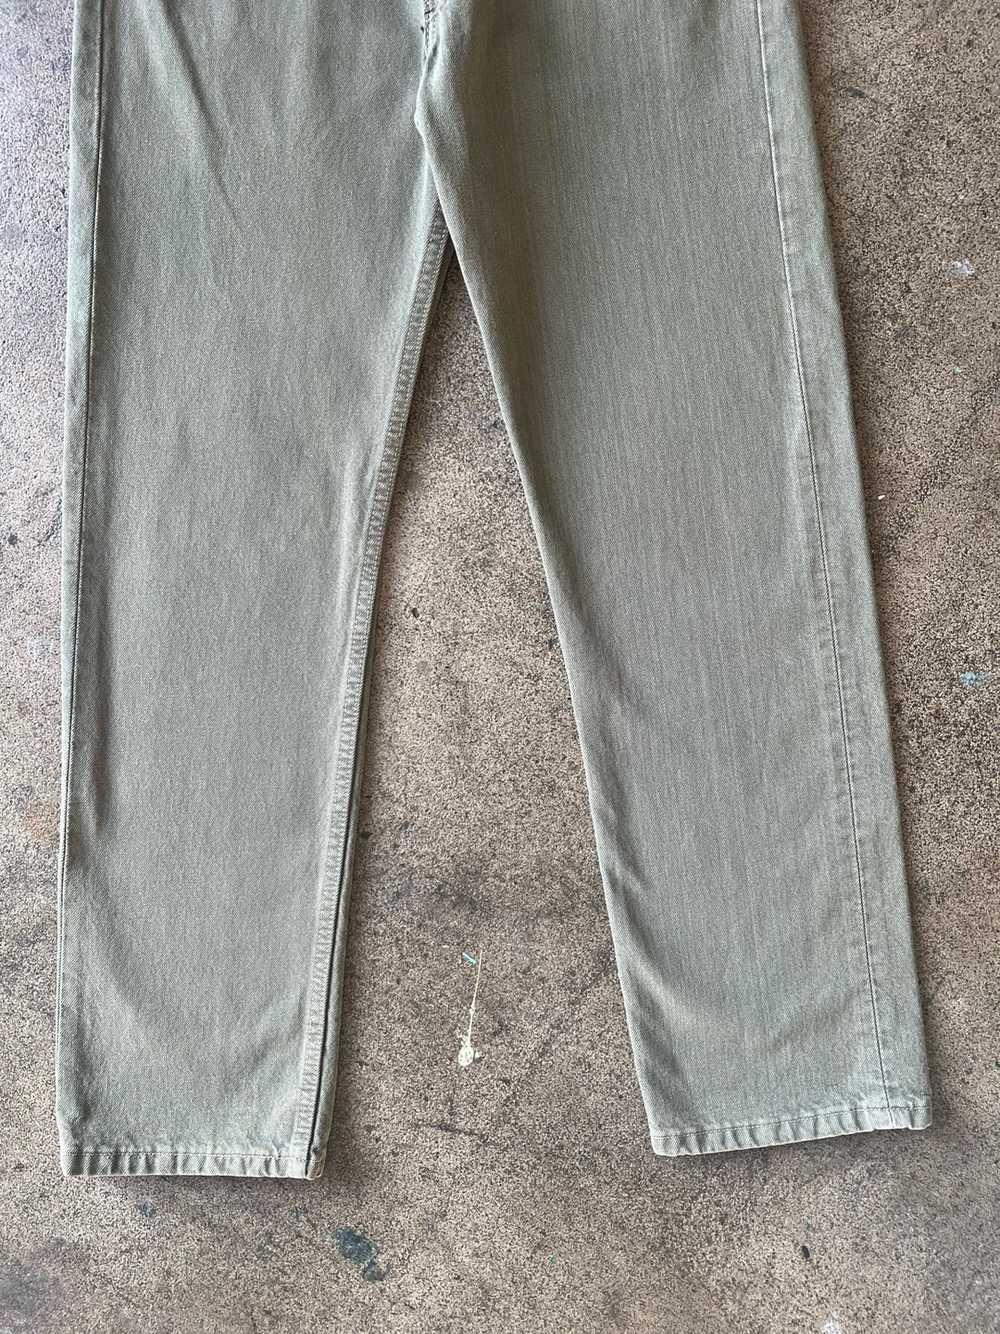 1990s Levi's 501 Faded Green Jeans 33" x 30" - image 3